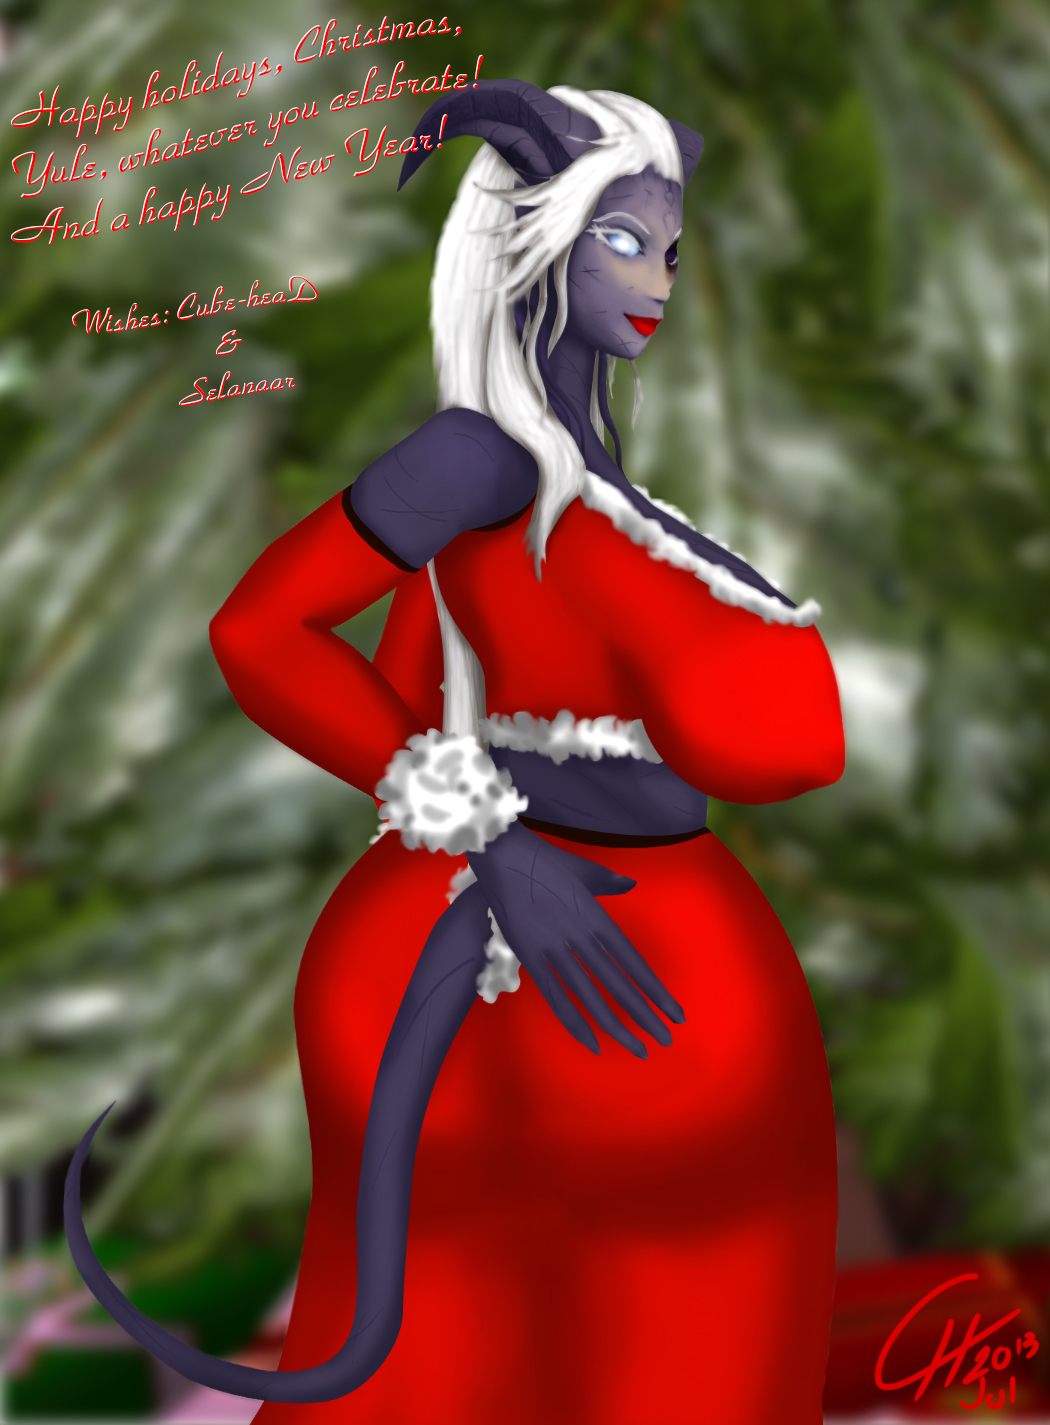 Hyv�� Joulua from Selanaar! [Draenei/Pinup/Tease]
Happy Holidays, Christmas, Yule and whatever you celebrate! 2013!
Keywords: Draenei;OC;Tease;Pinup;BBW